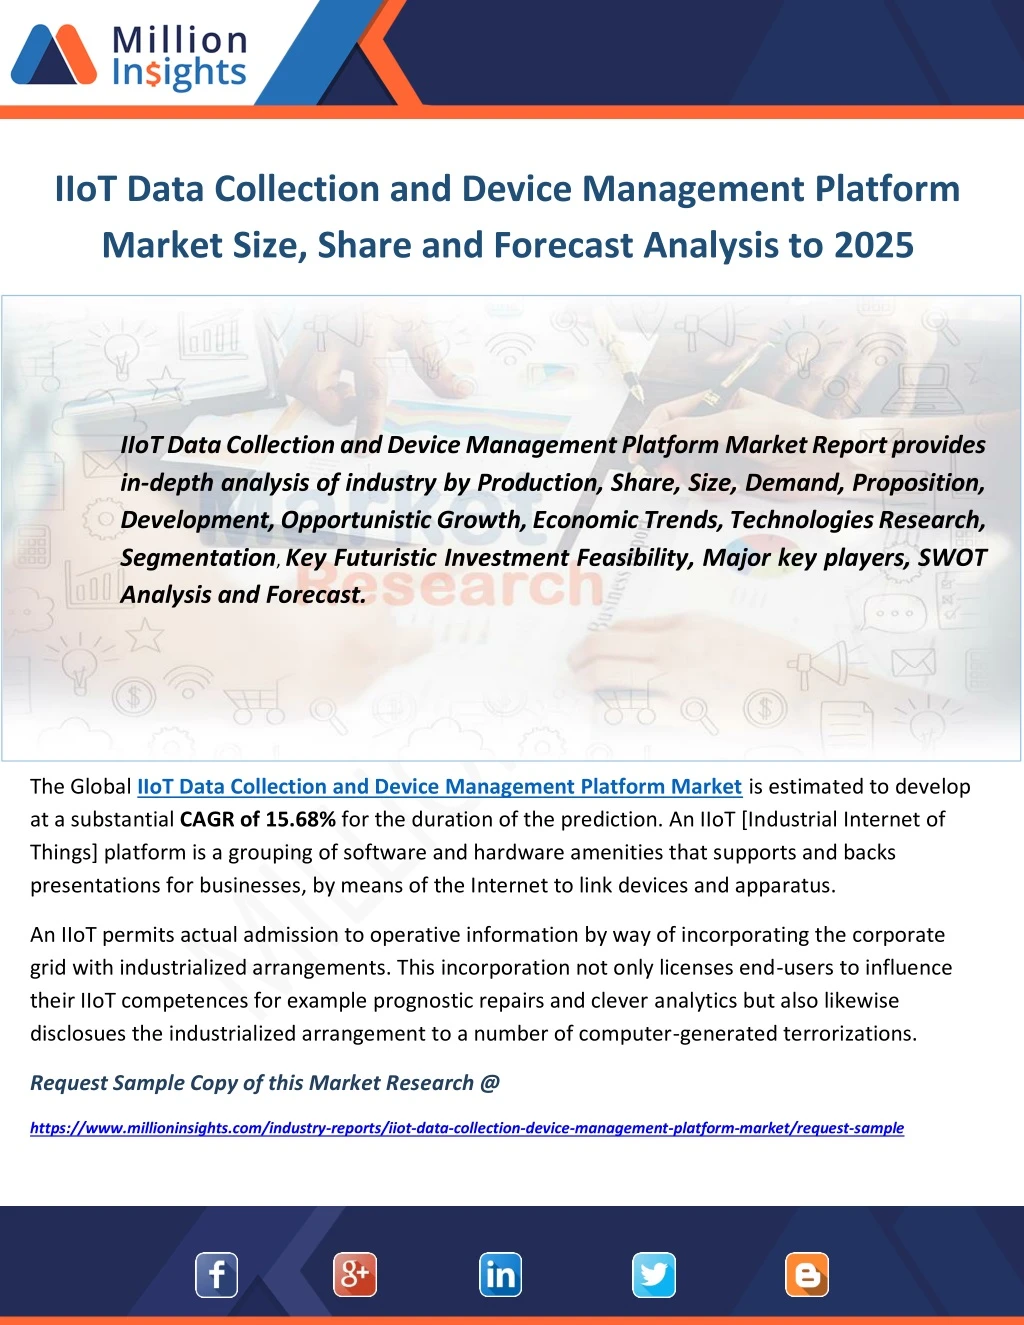 iiot data collection and device management